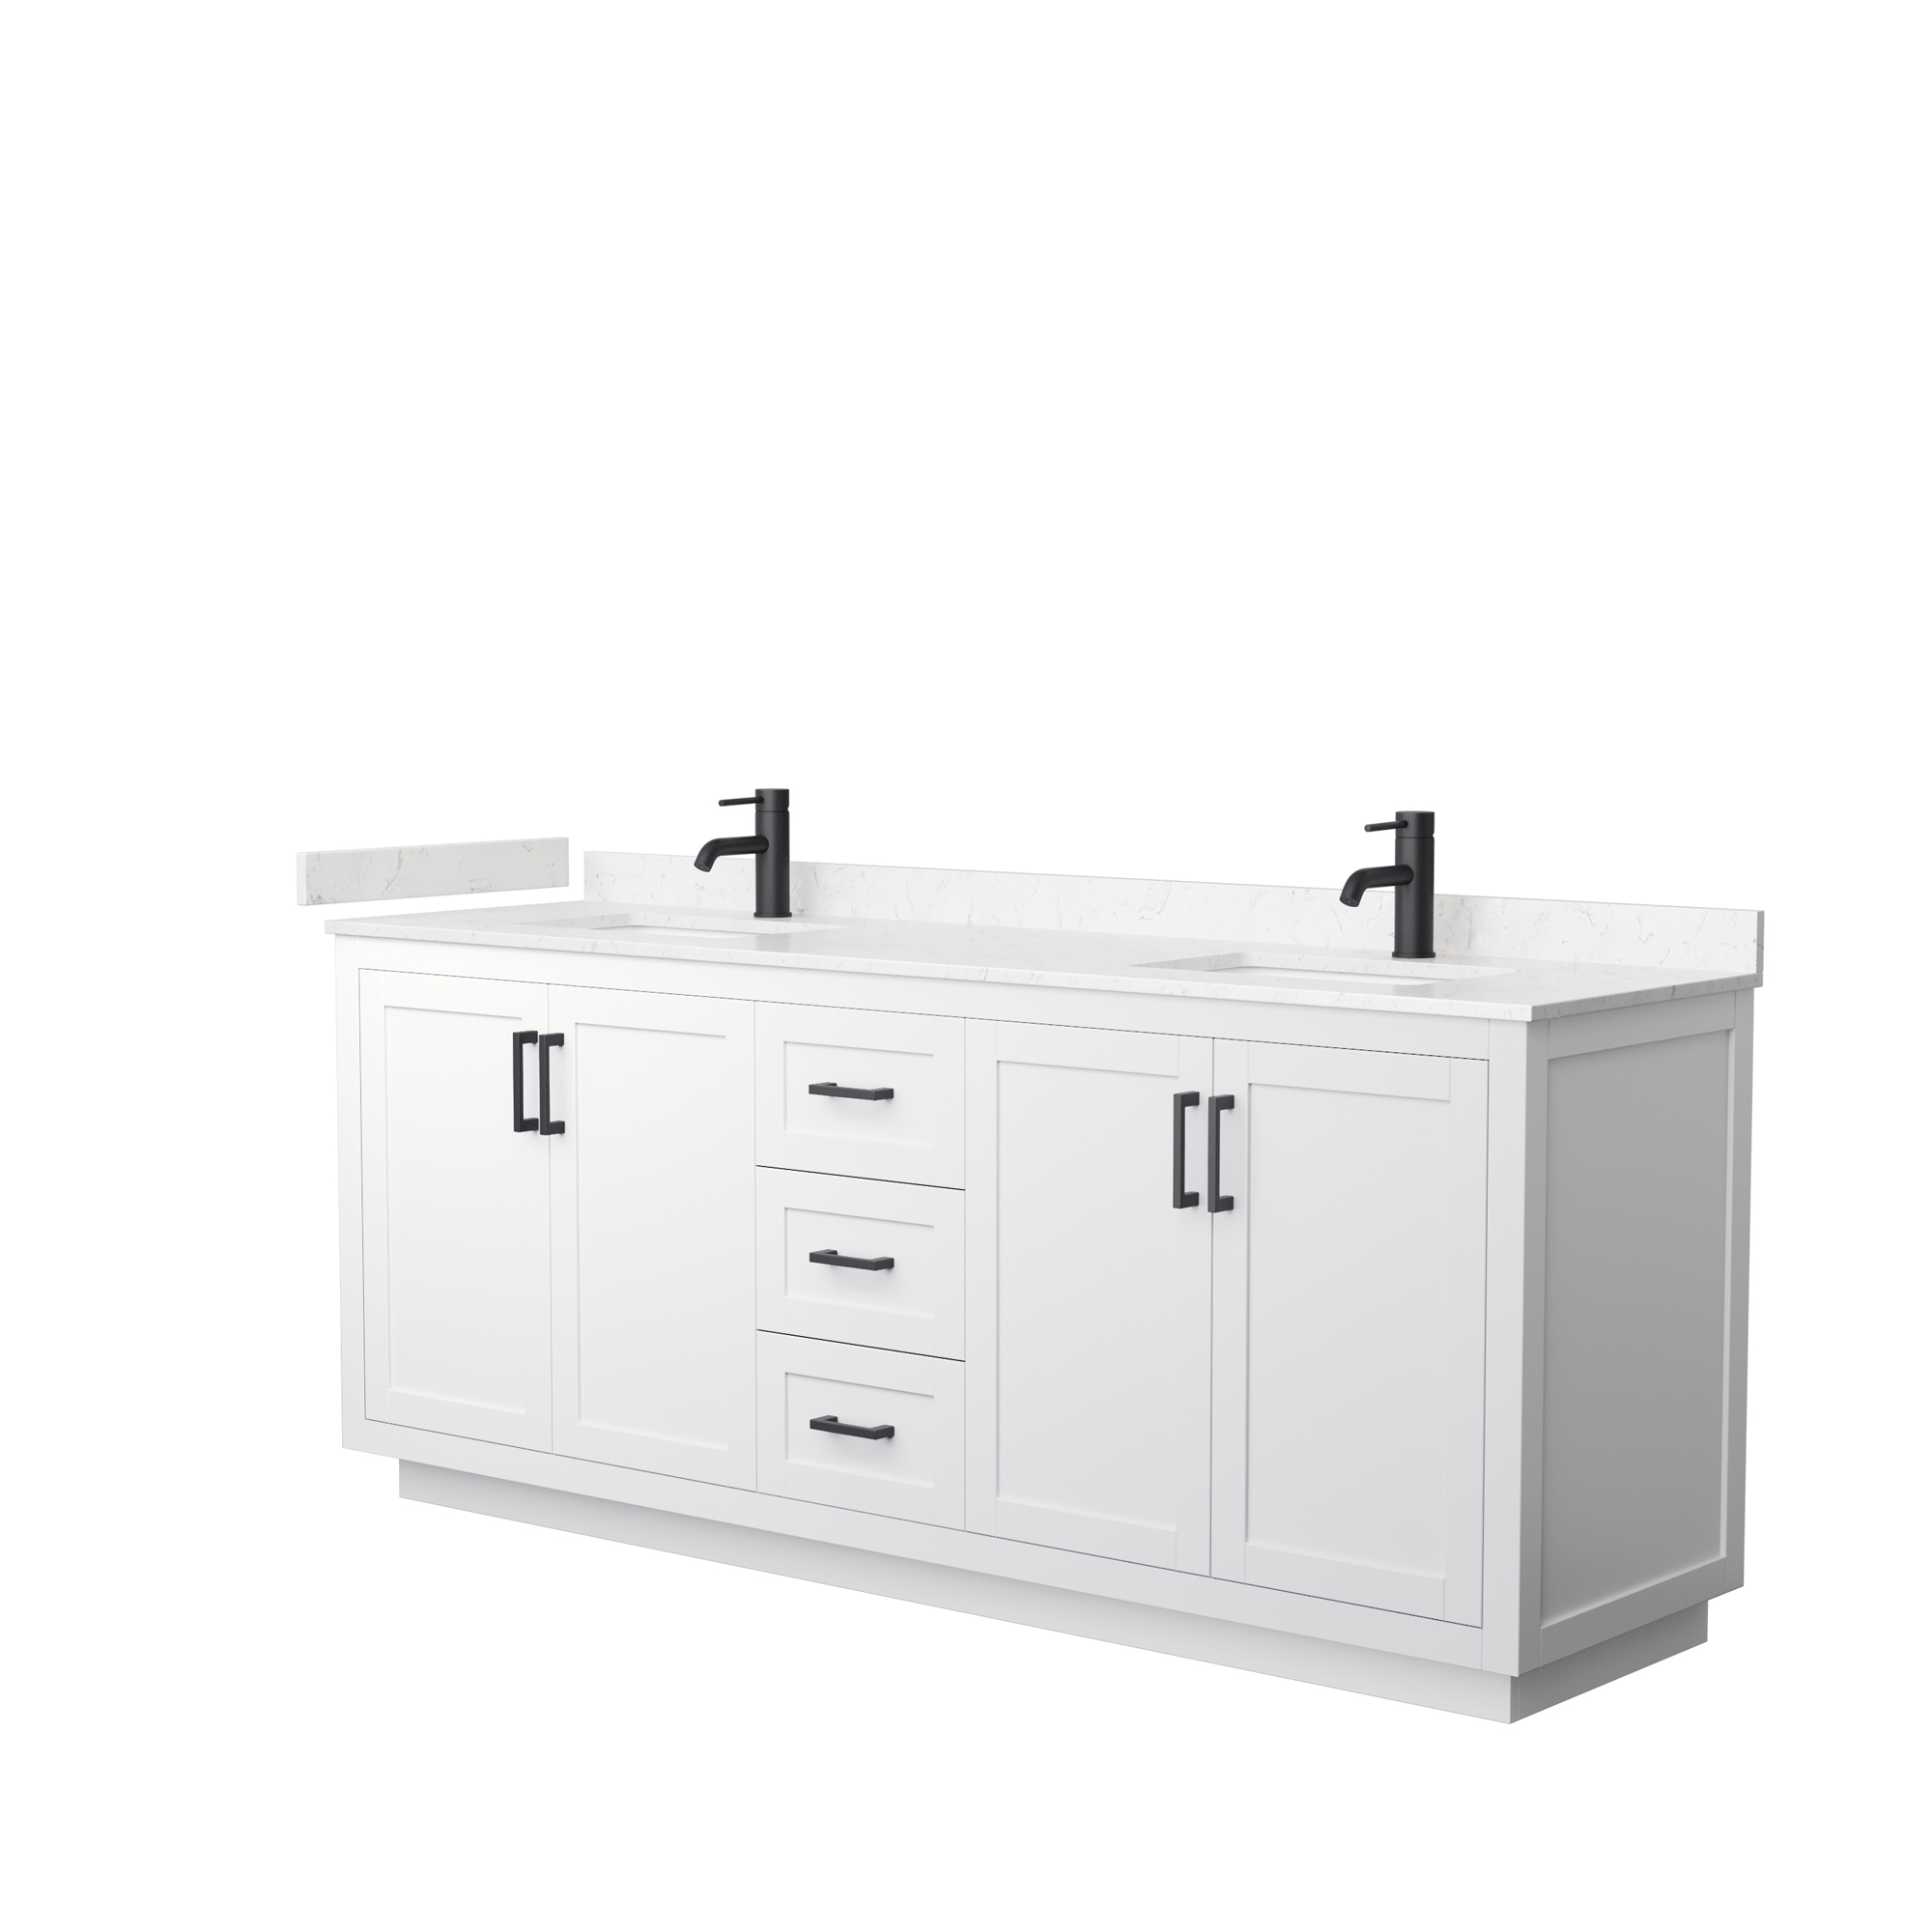 miranda 80" double vanity with optional cultured marble counter - white